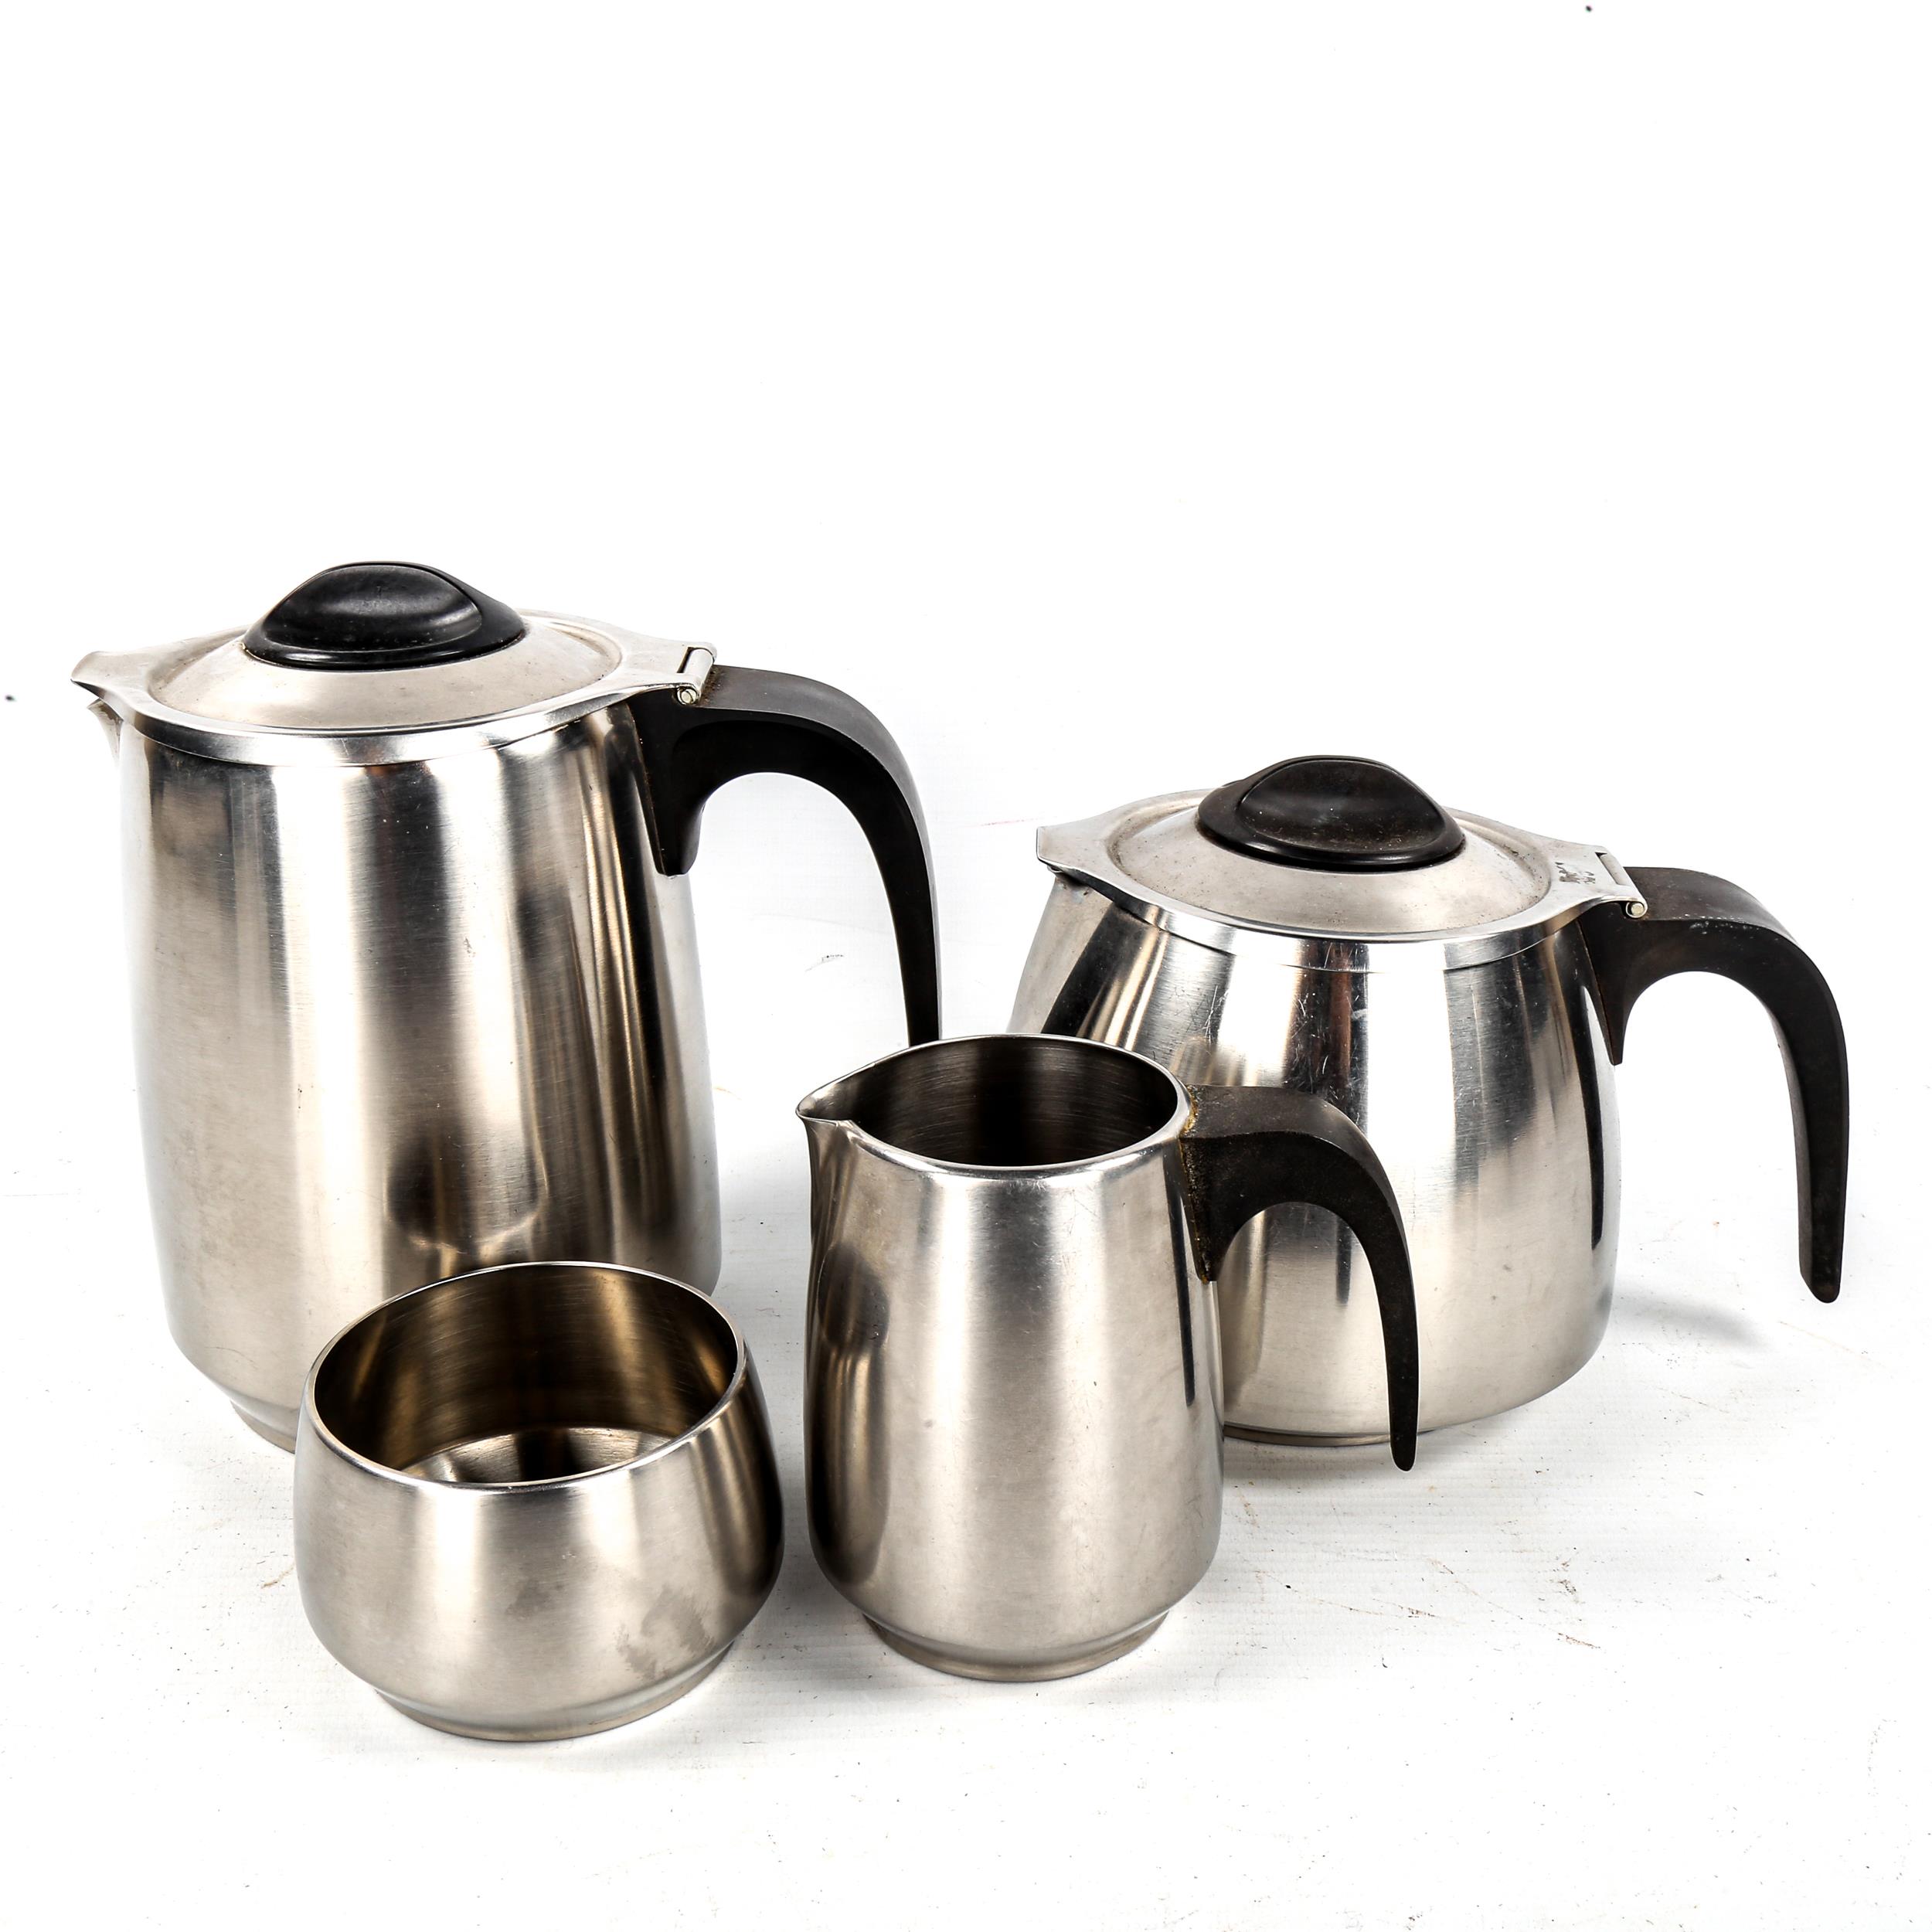 WMF, a 1960s Cromargan stainless steel tea service Overall good condition, signs of use commensurate